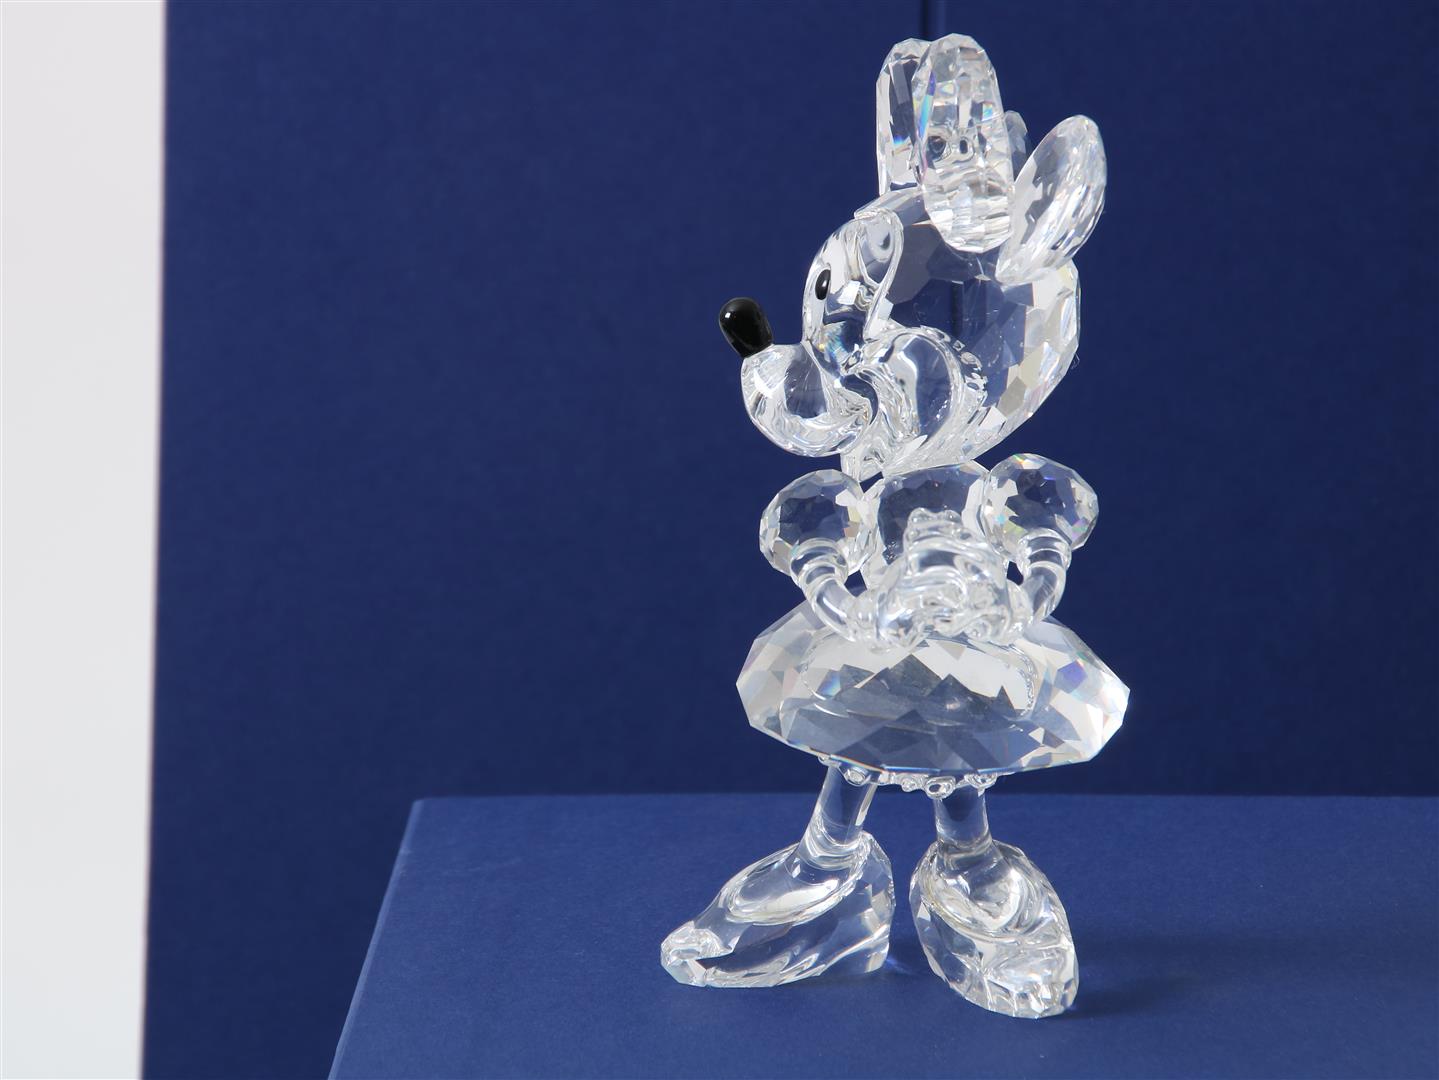 Series of 6 Swarovski crystal sculptures, Disney Showcase Collection, Donald Duck, Daisy Duck, - Image 7 of 11